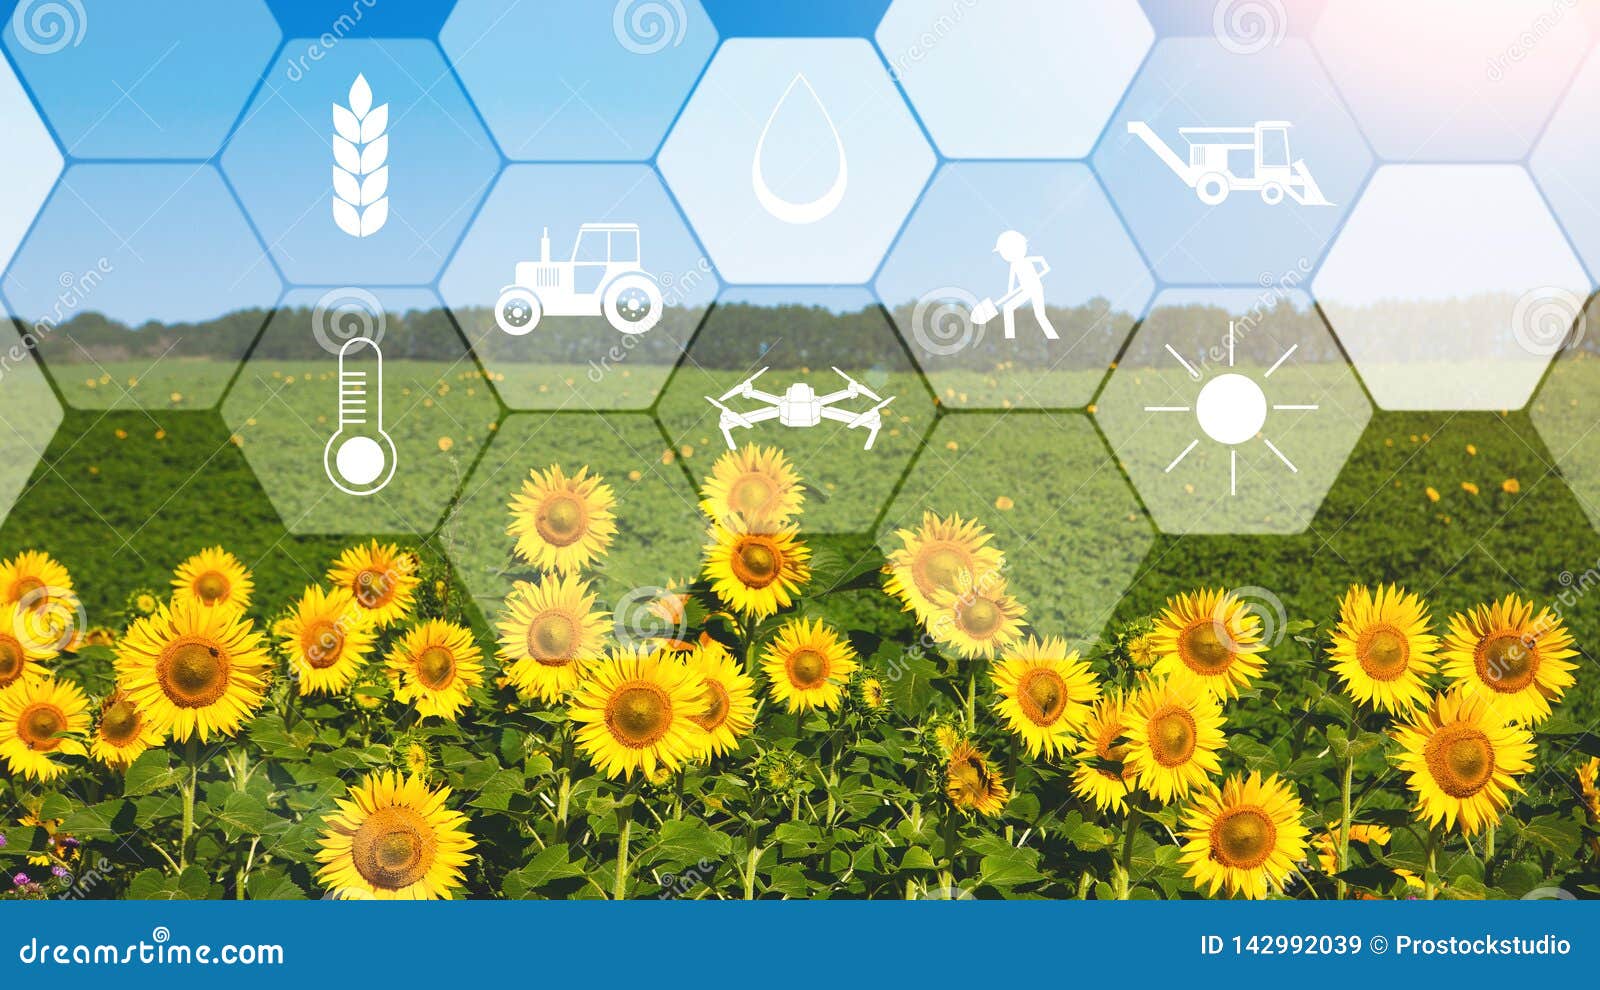 Concept Of Smart Agriculture And Modern Technology Stock Image - Image ...